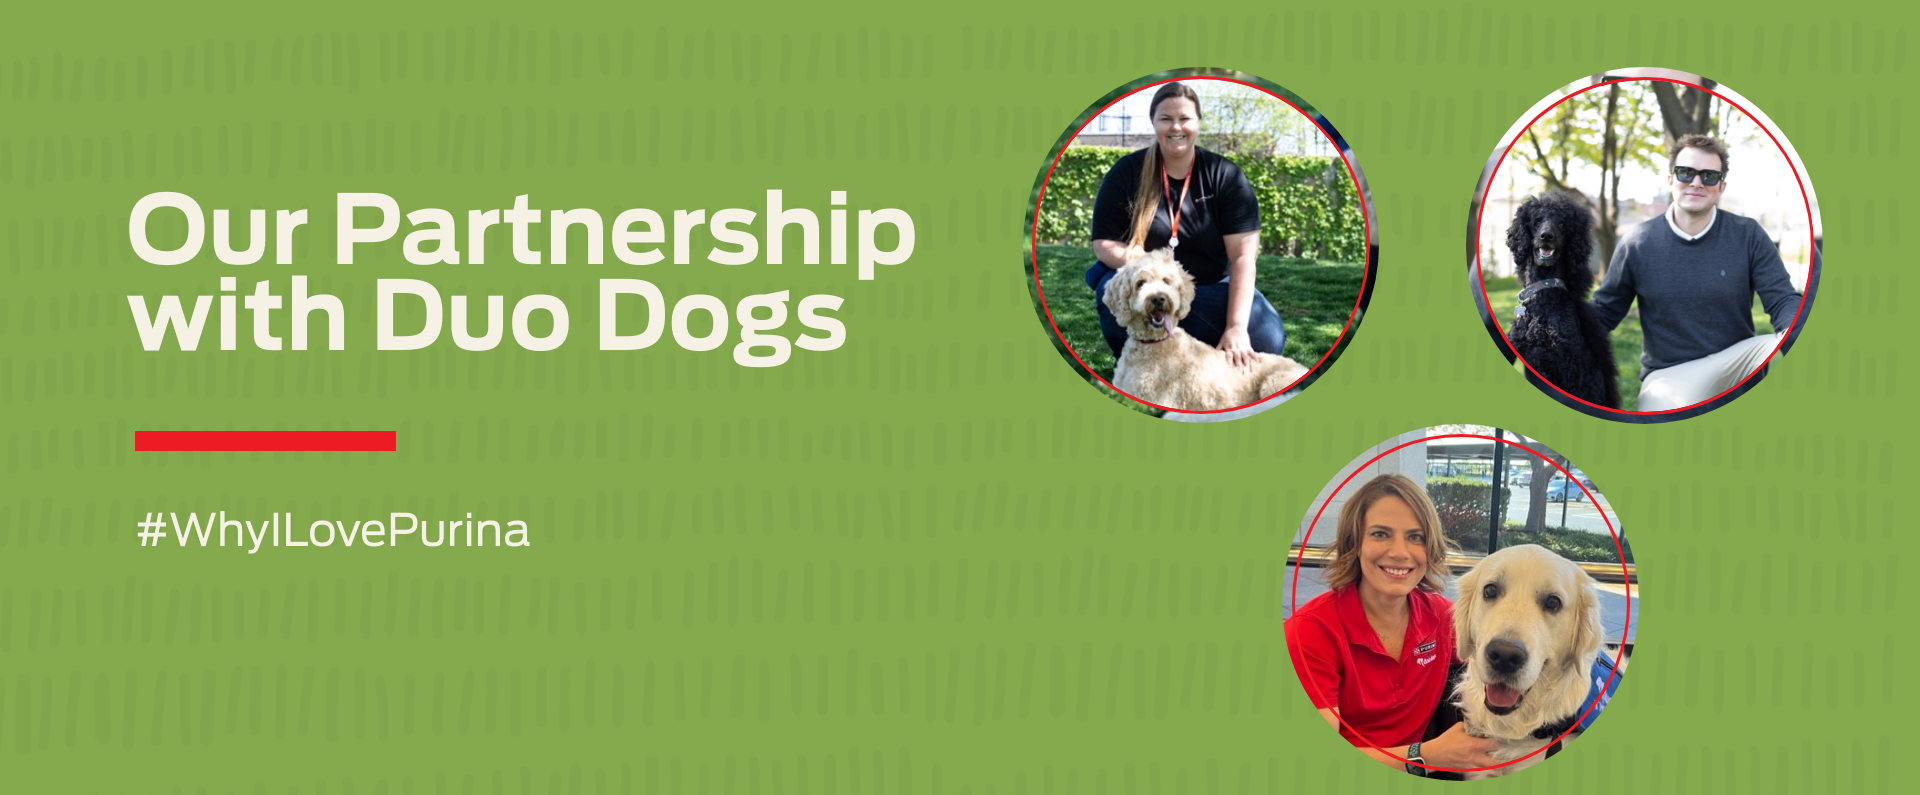 Our Partnership with Duo Dogs